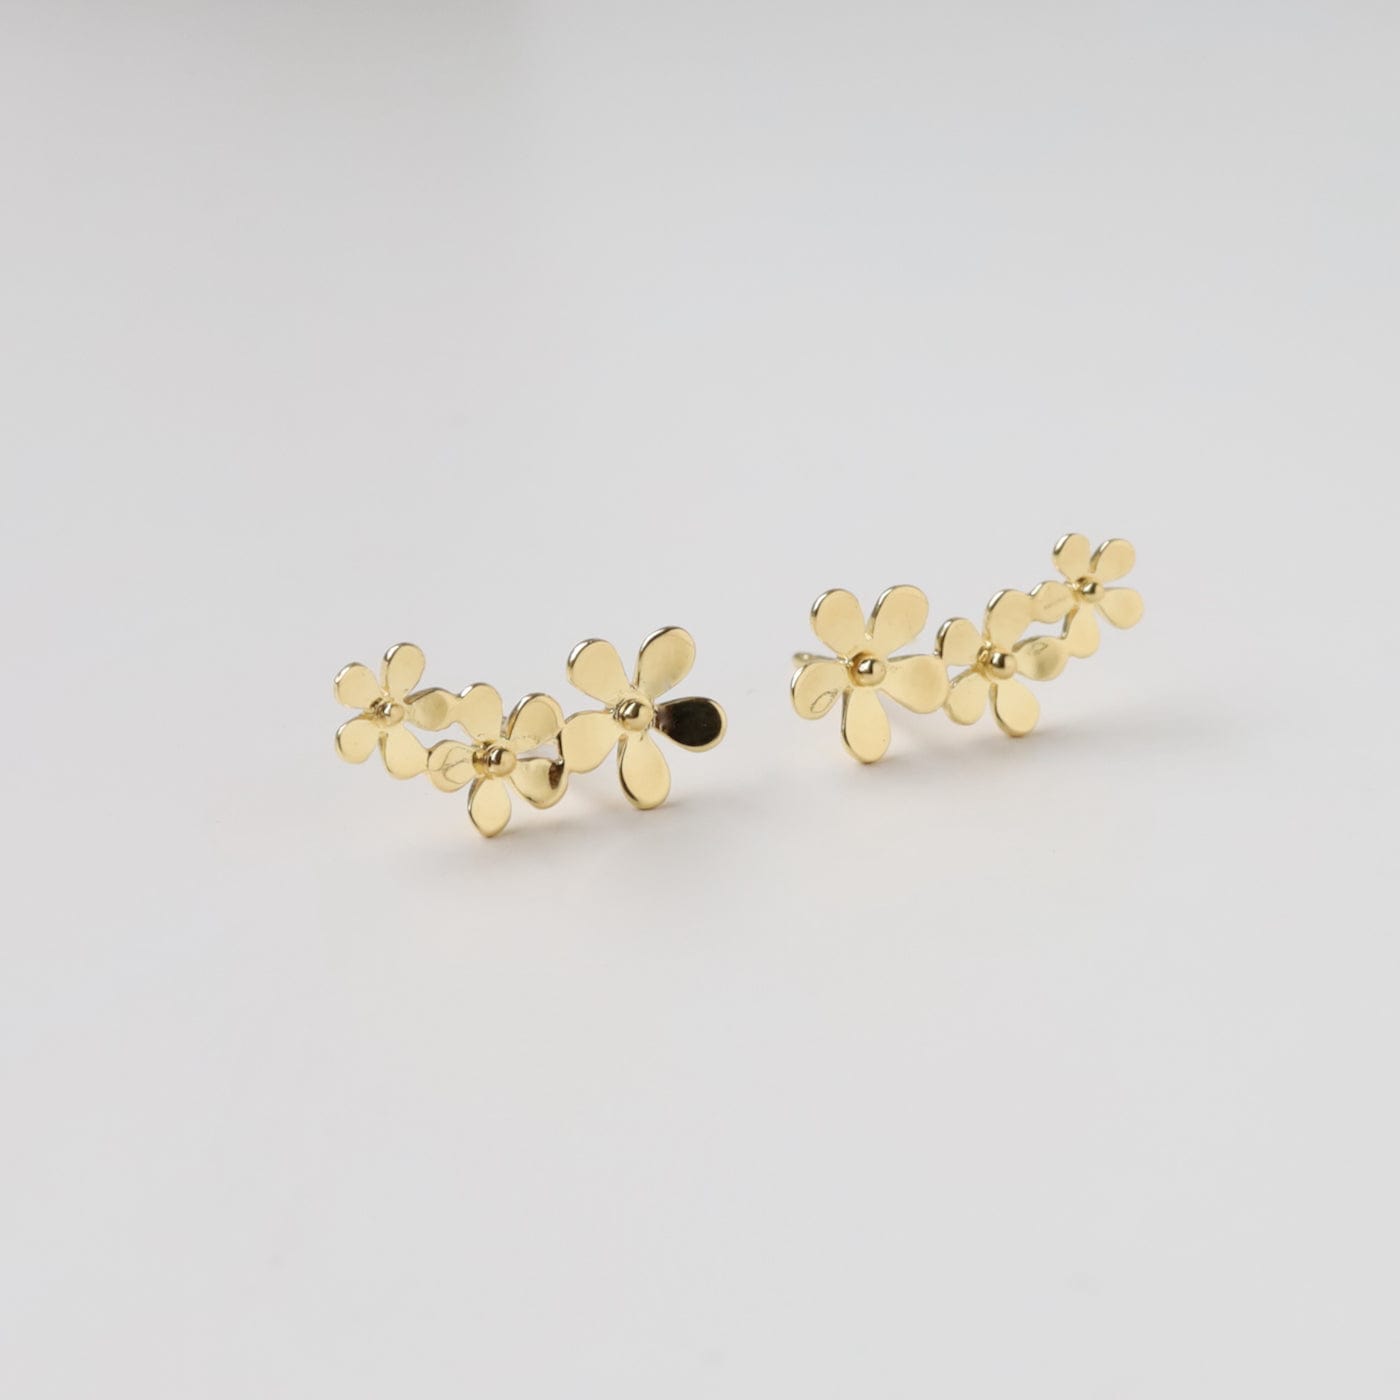 EAR-VRM Gold Vermeil Climbing Curve of Forget-me-not Flowers Studs